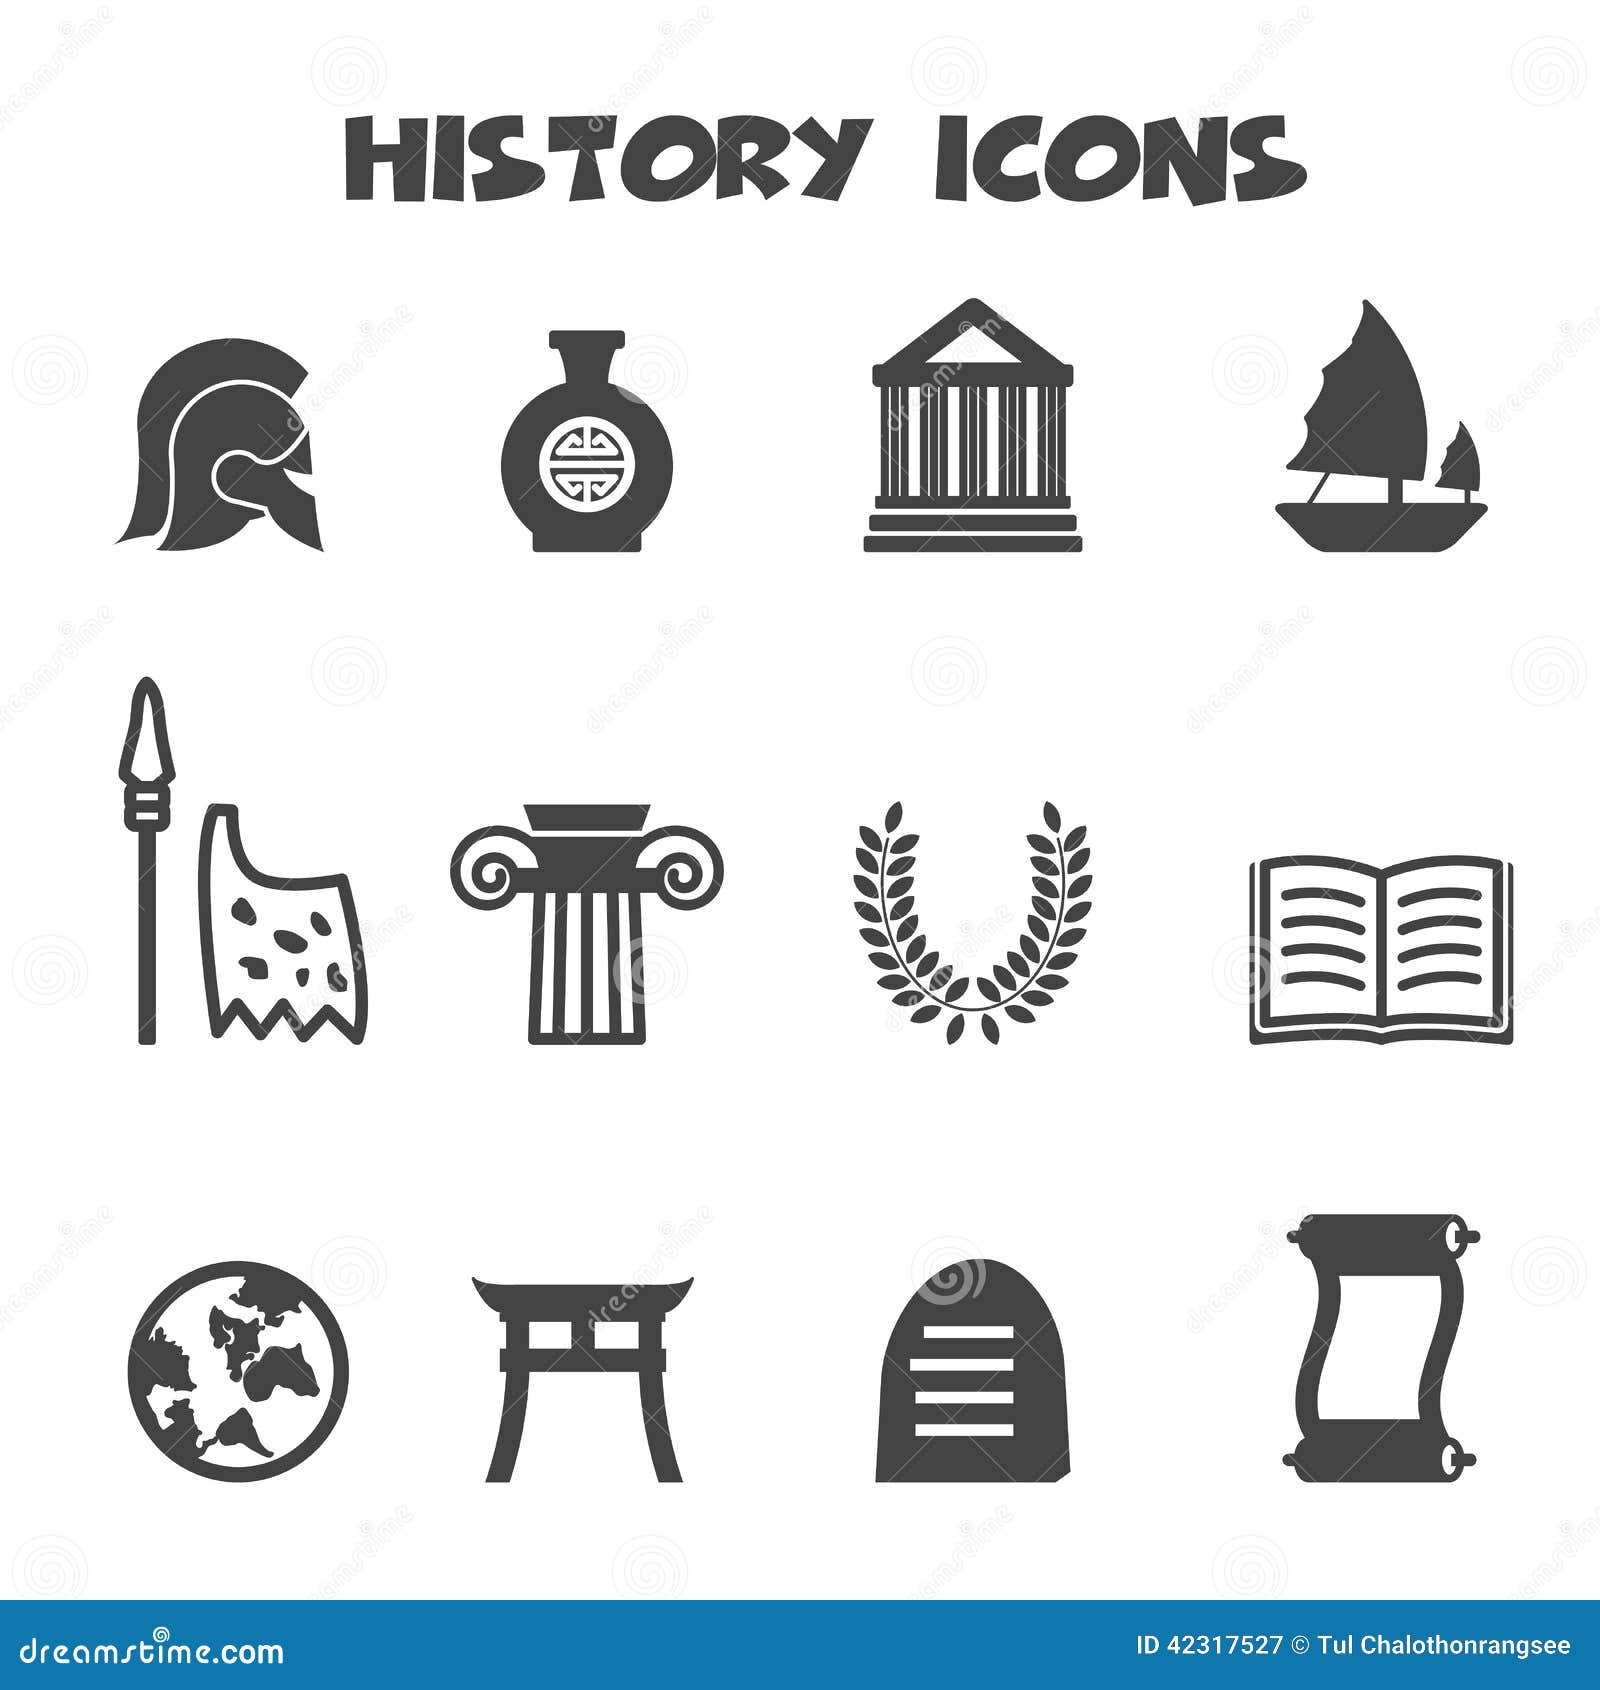 history clipart black and white - photo #15